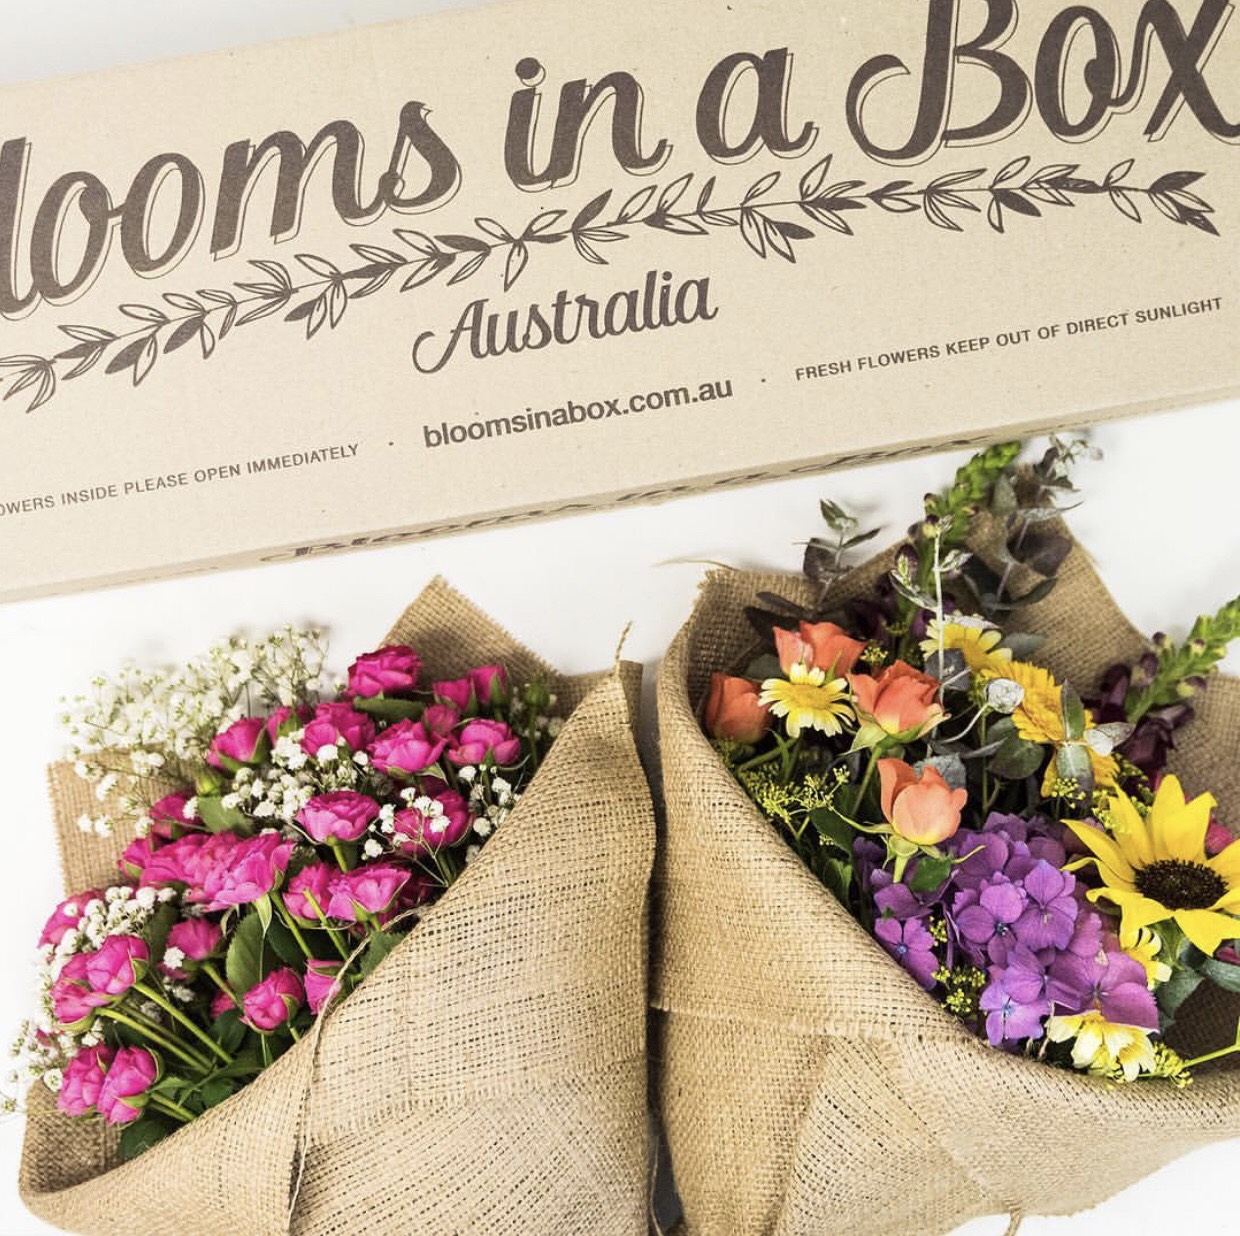  Image credit - Blooms in a Box 